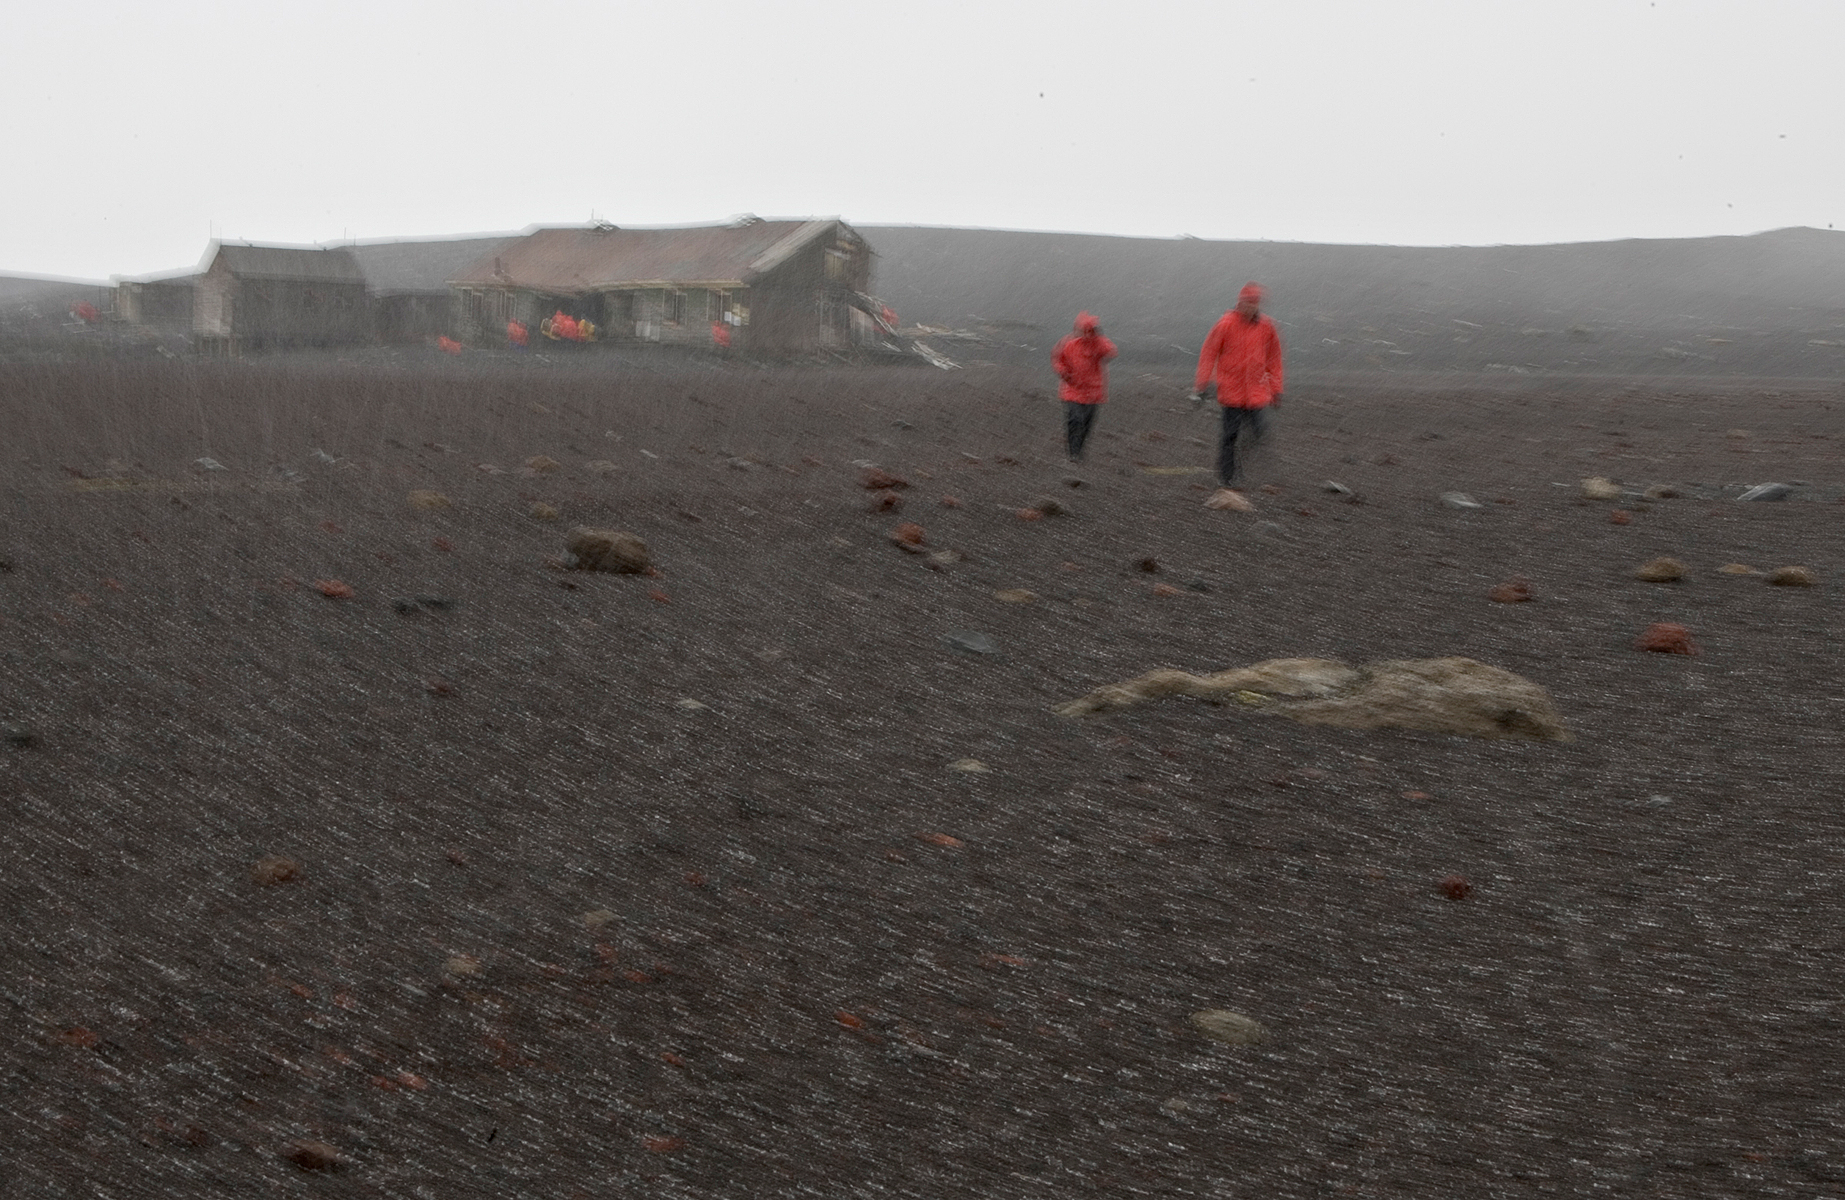 Snow Storm at Deception Island - Whalers Bay